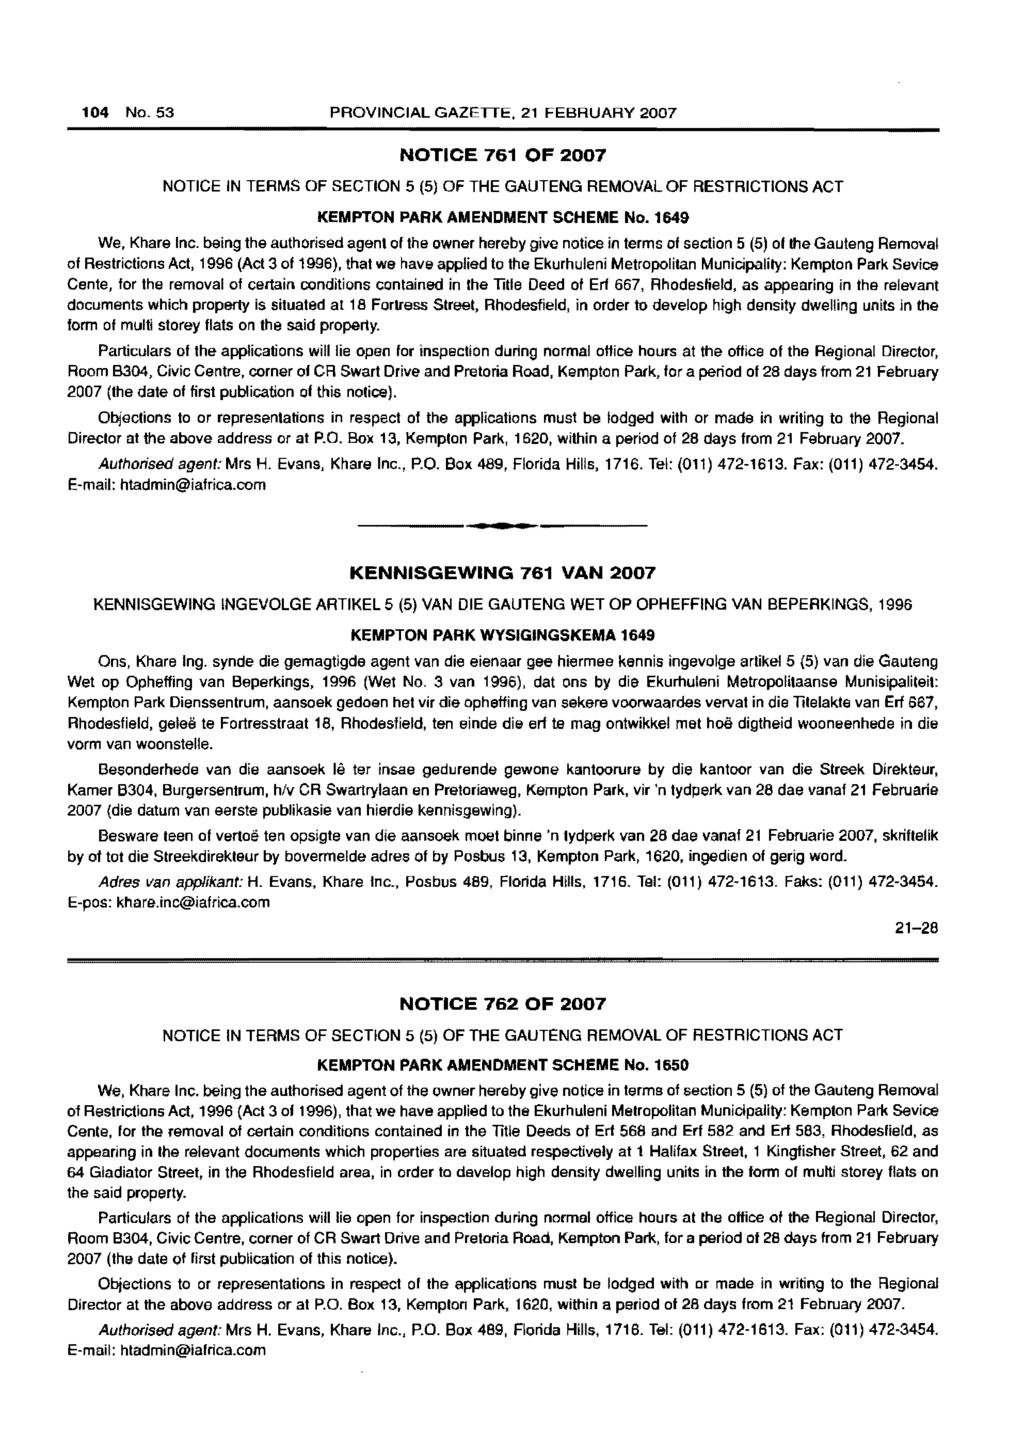 104 No. 53 PROVINCIAL GAZETTE, 21 FEBRUARY 2007 NOTICE 761 OF 2007 NOTICE IN TERMS OF SECTION 5 (5) OF THE GAUTENG REMOVAL OF RESTRICTIONS ACT KEMPTON PARK AMENDMENT SCHEME No. 1649 We, Khare Inc.